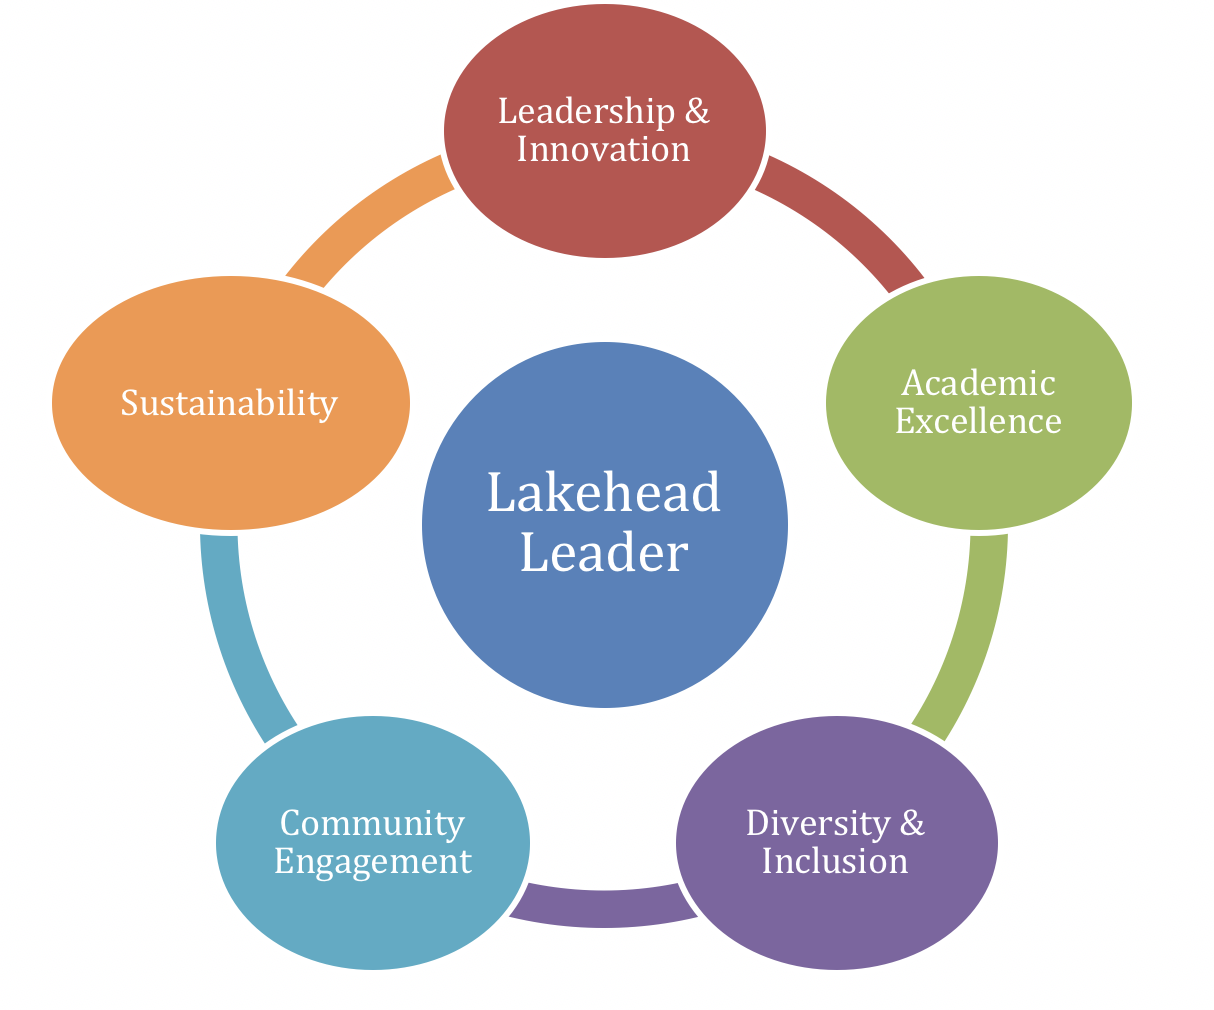 Lakehead Leader includes: Leadership & Innovation, Academic Excellence, Diversity & Inclusion, Community Engagement, Sustainability